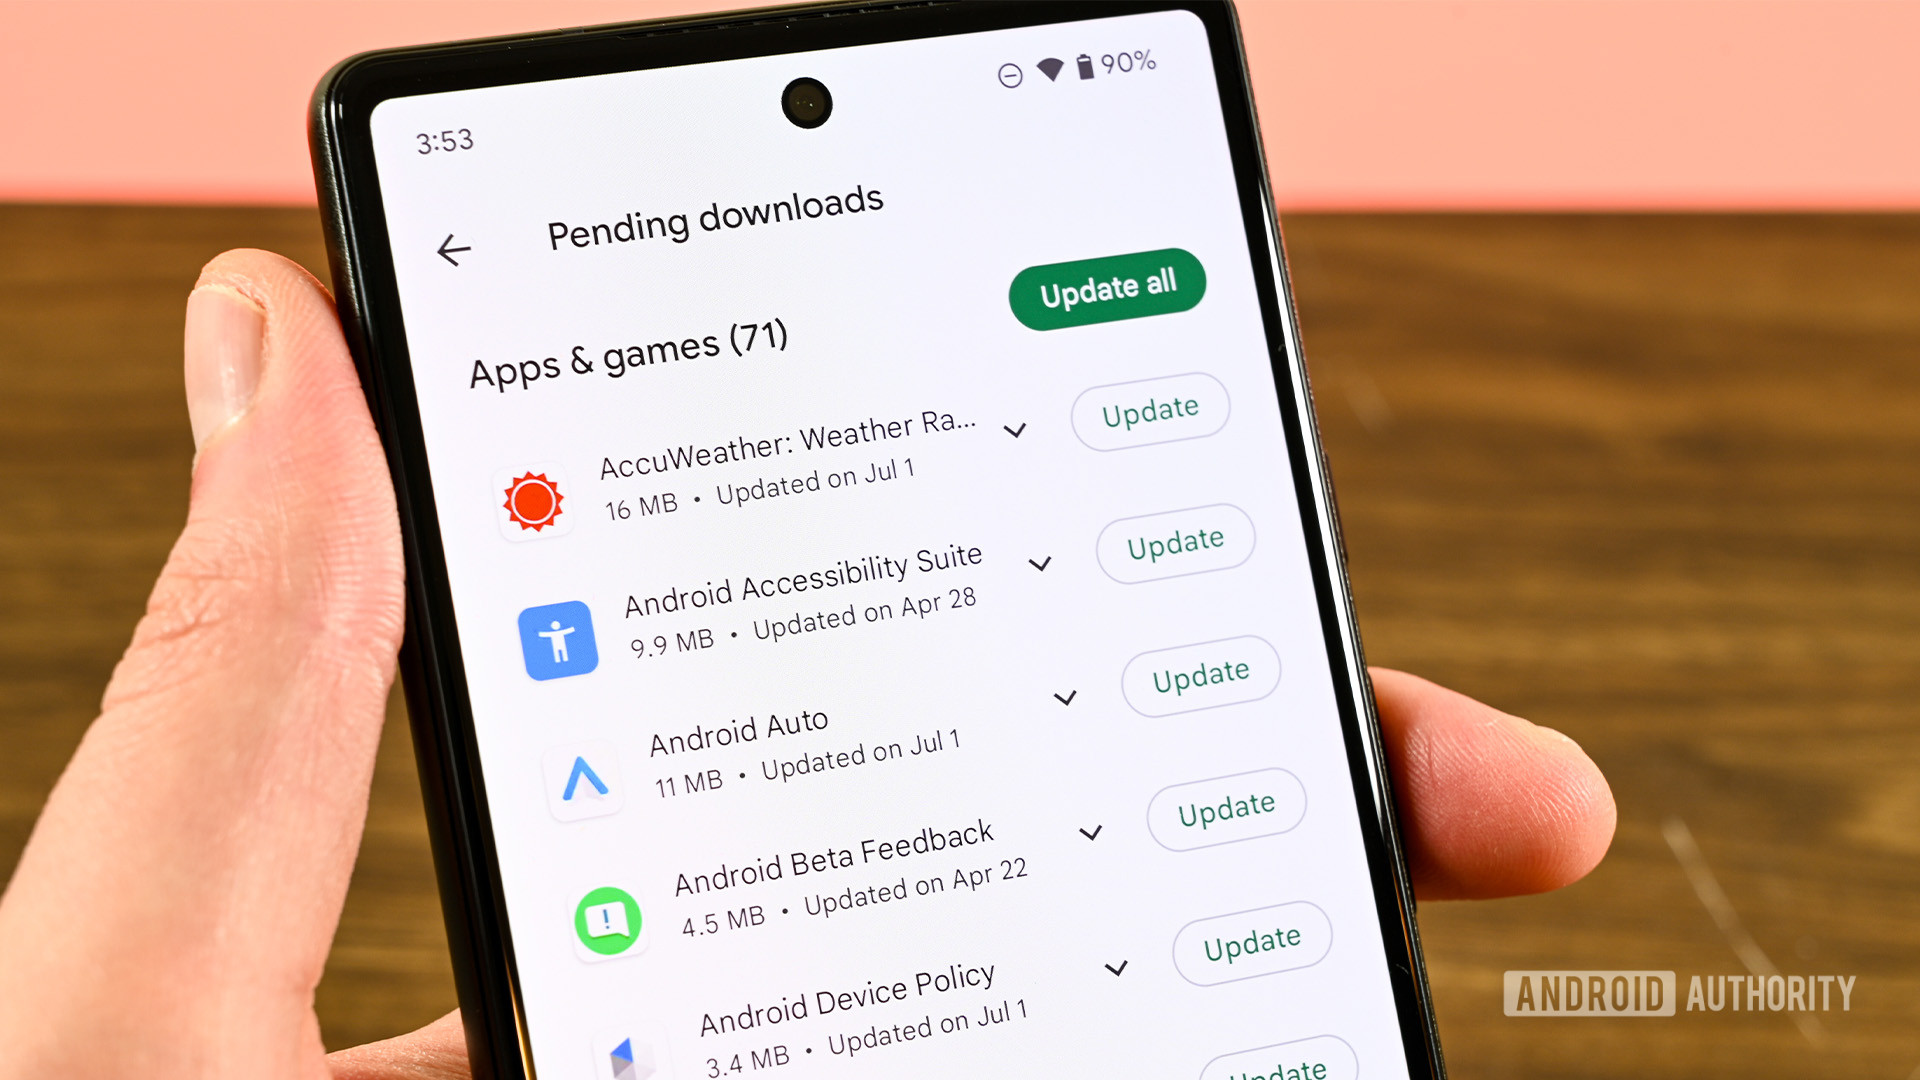 Google Play Store Update Apps